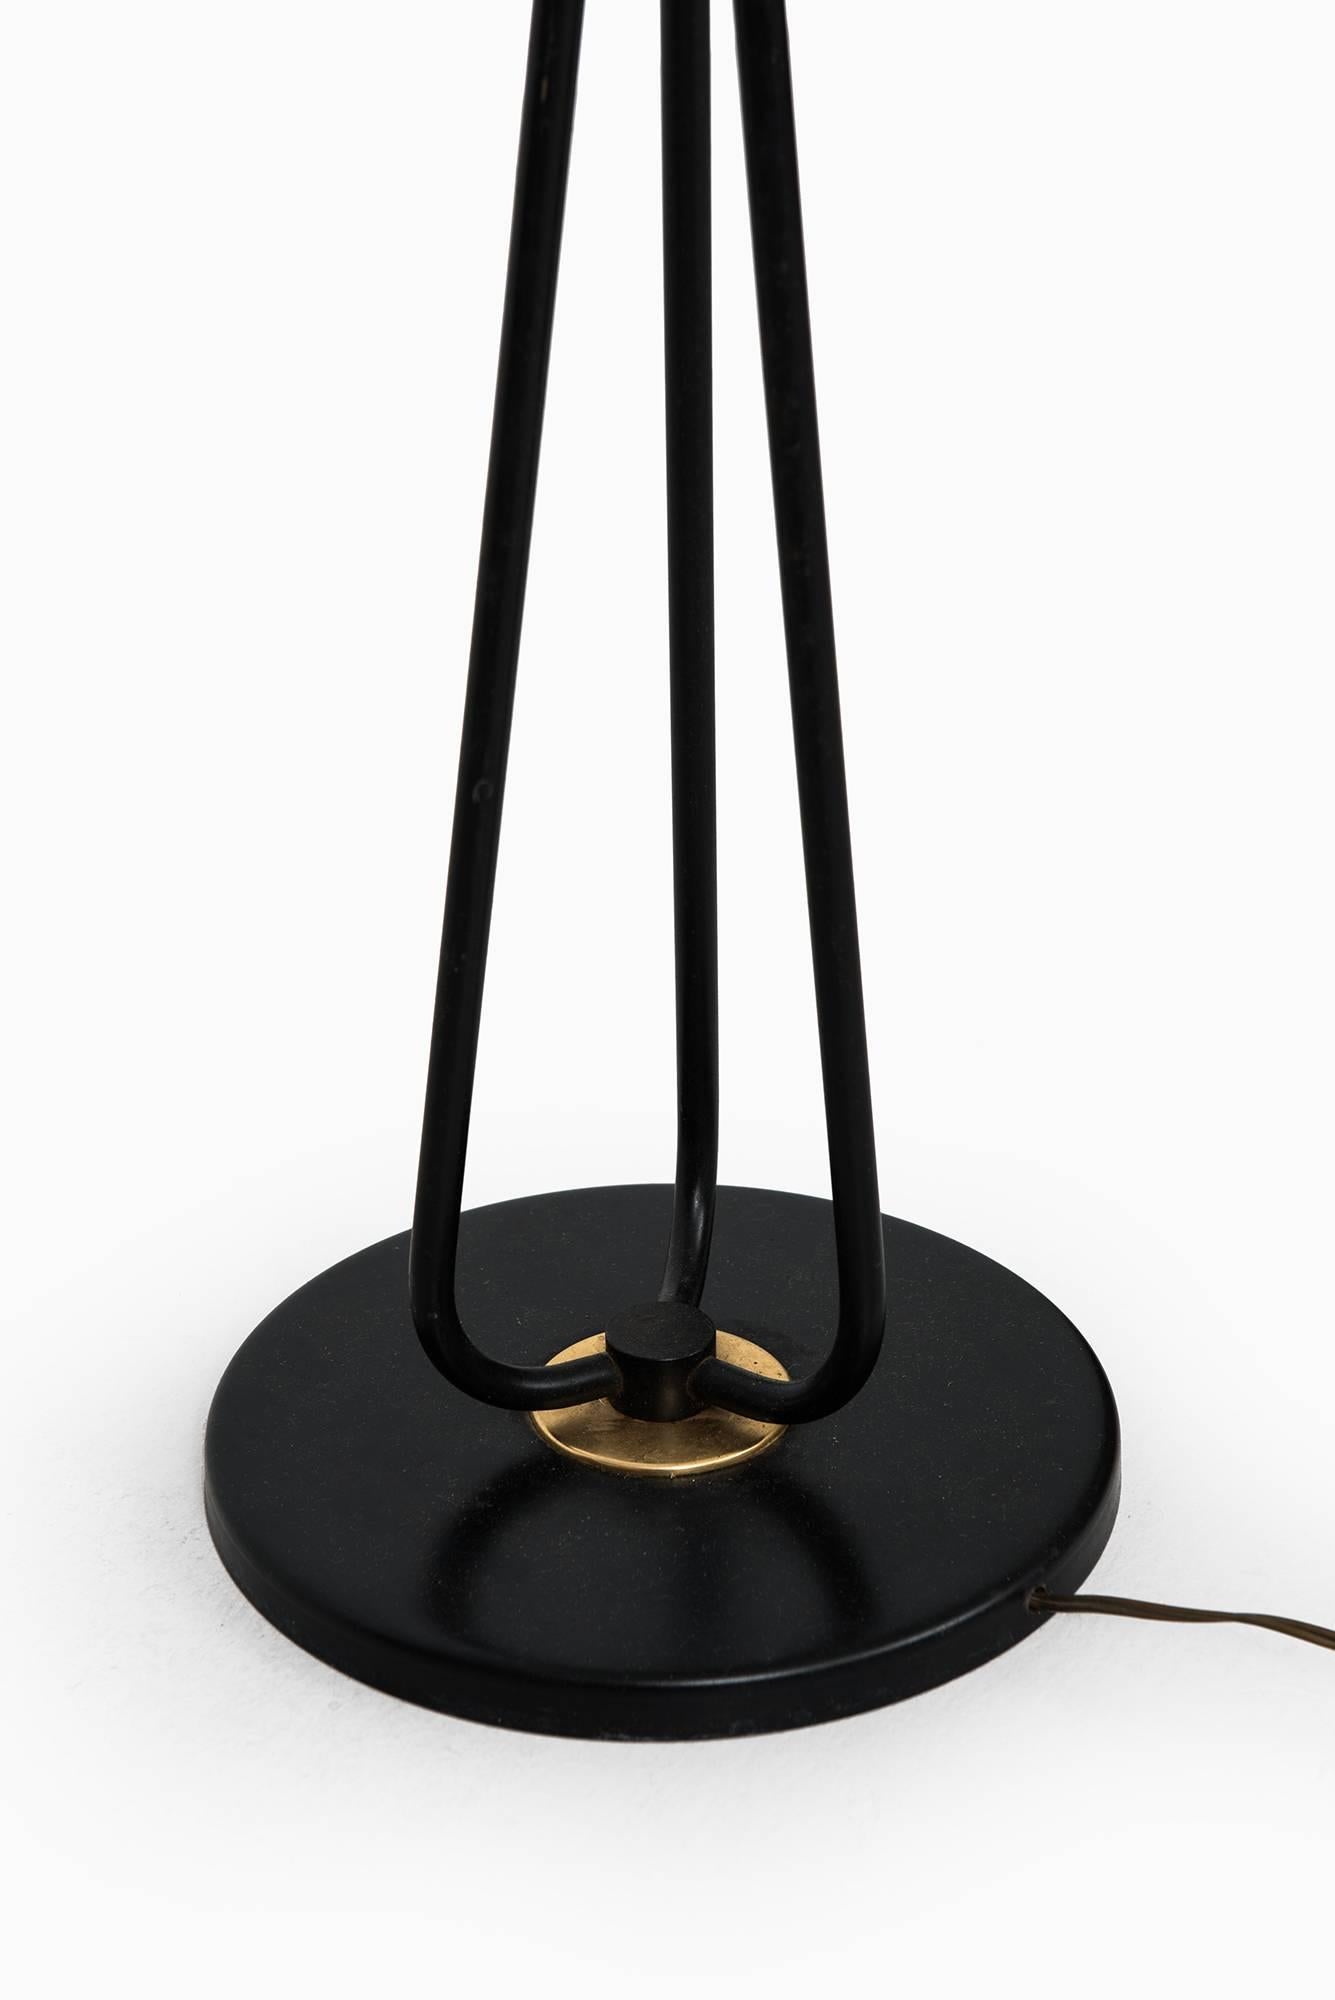 French Floor Lamp by Maison Lunel in France